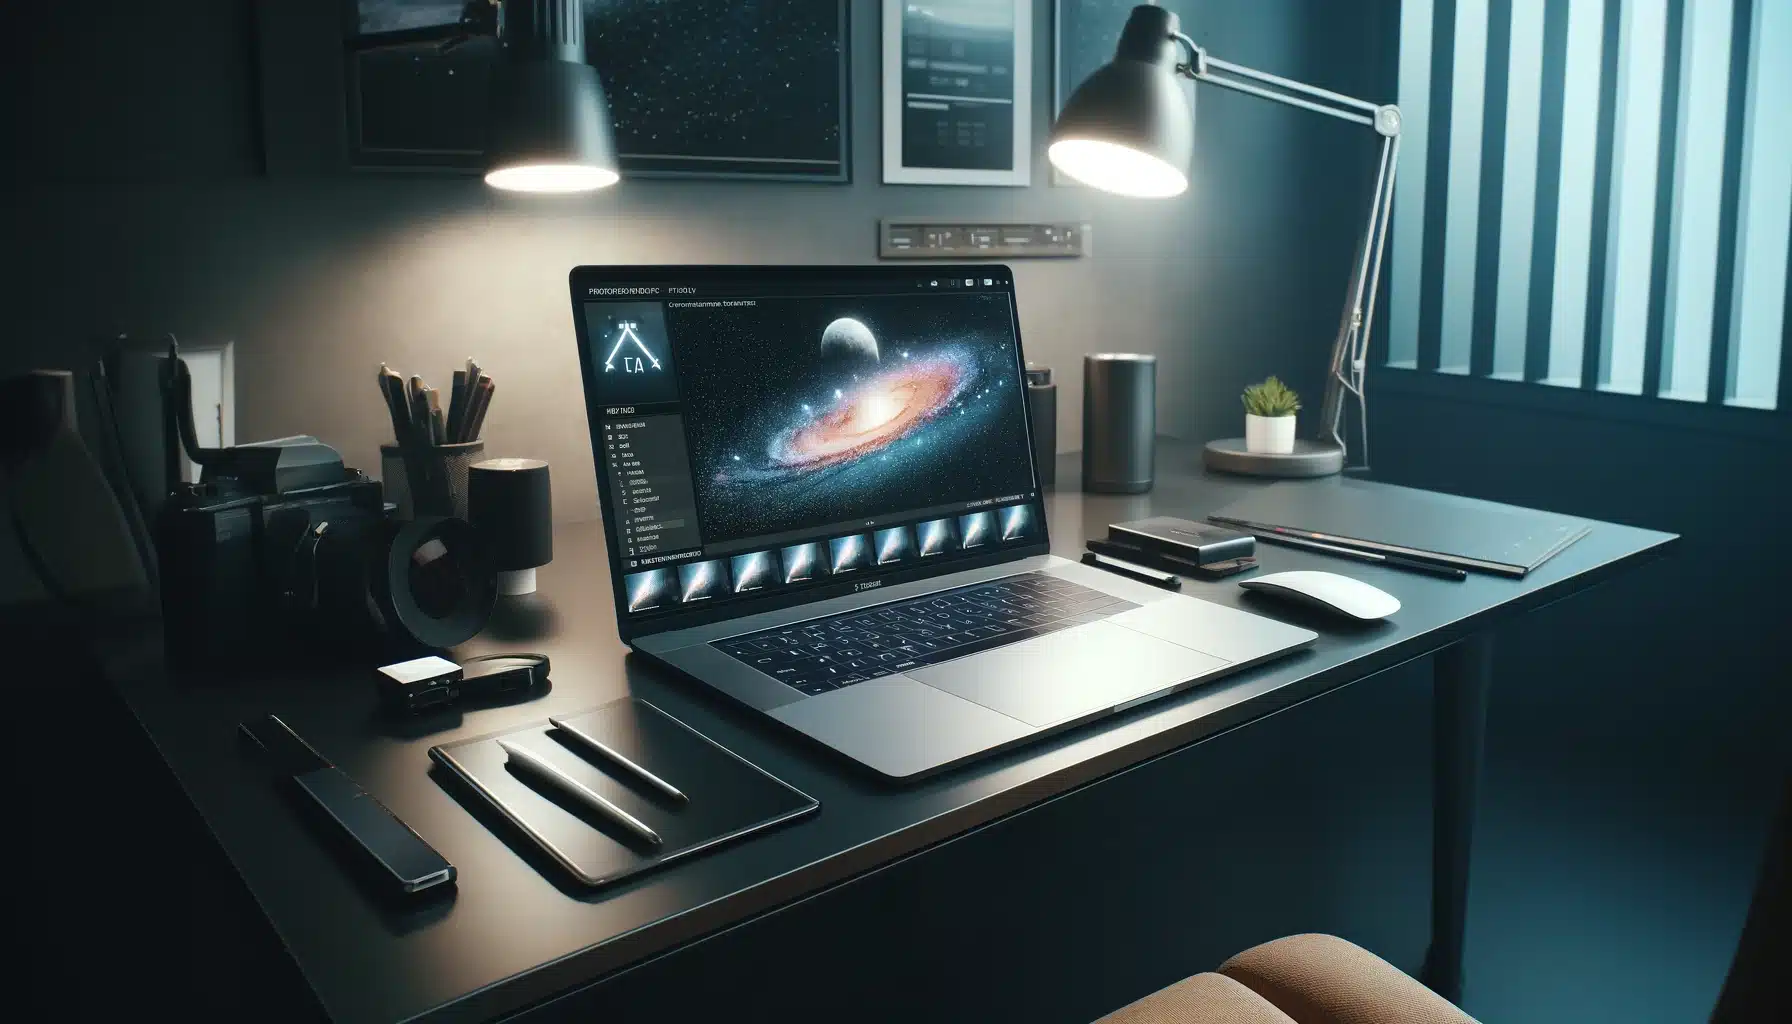 Laptop displaying Extraterrestrial imaging in a modern office setup